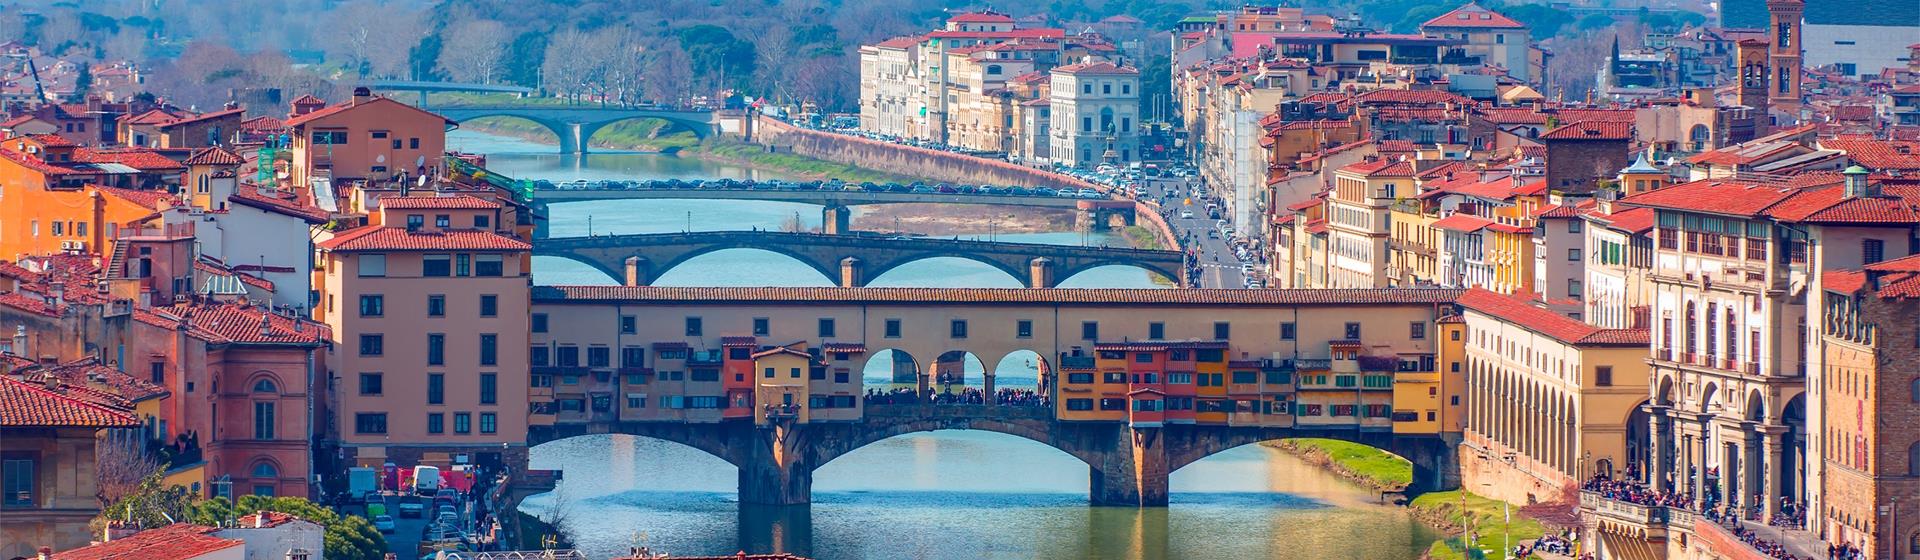 Holidays & City Breaks to Florence